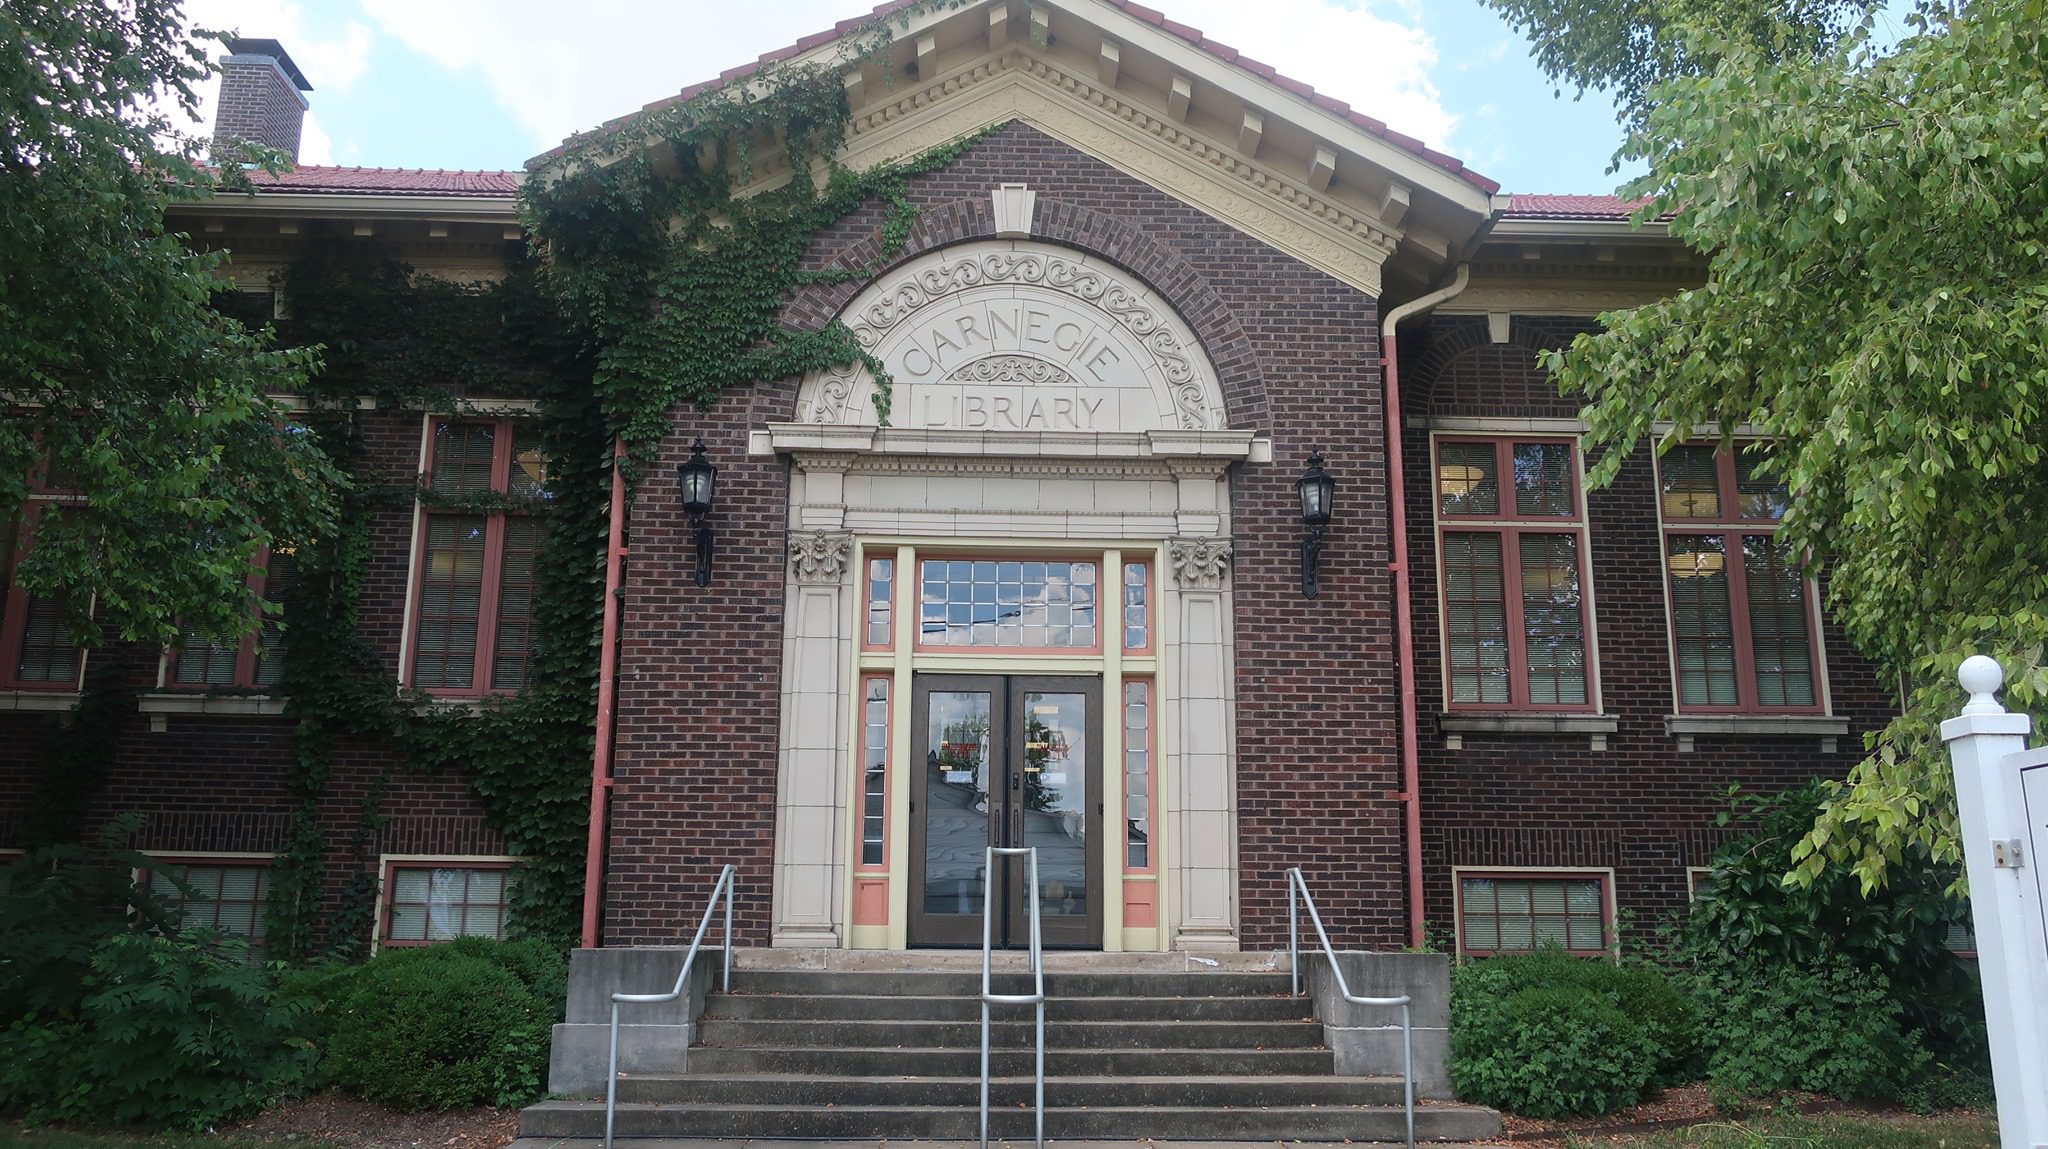 Marion Carnegie Library